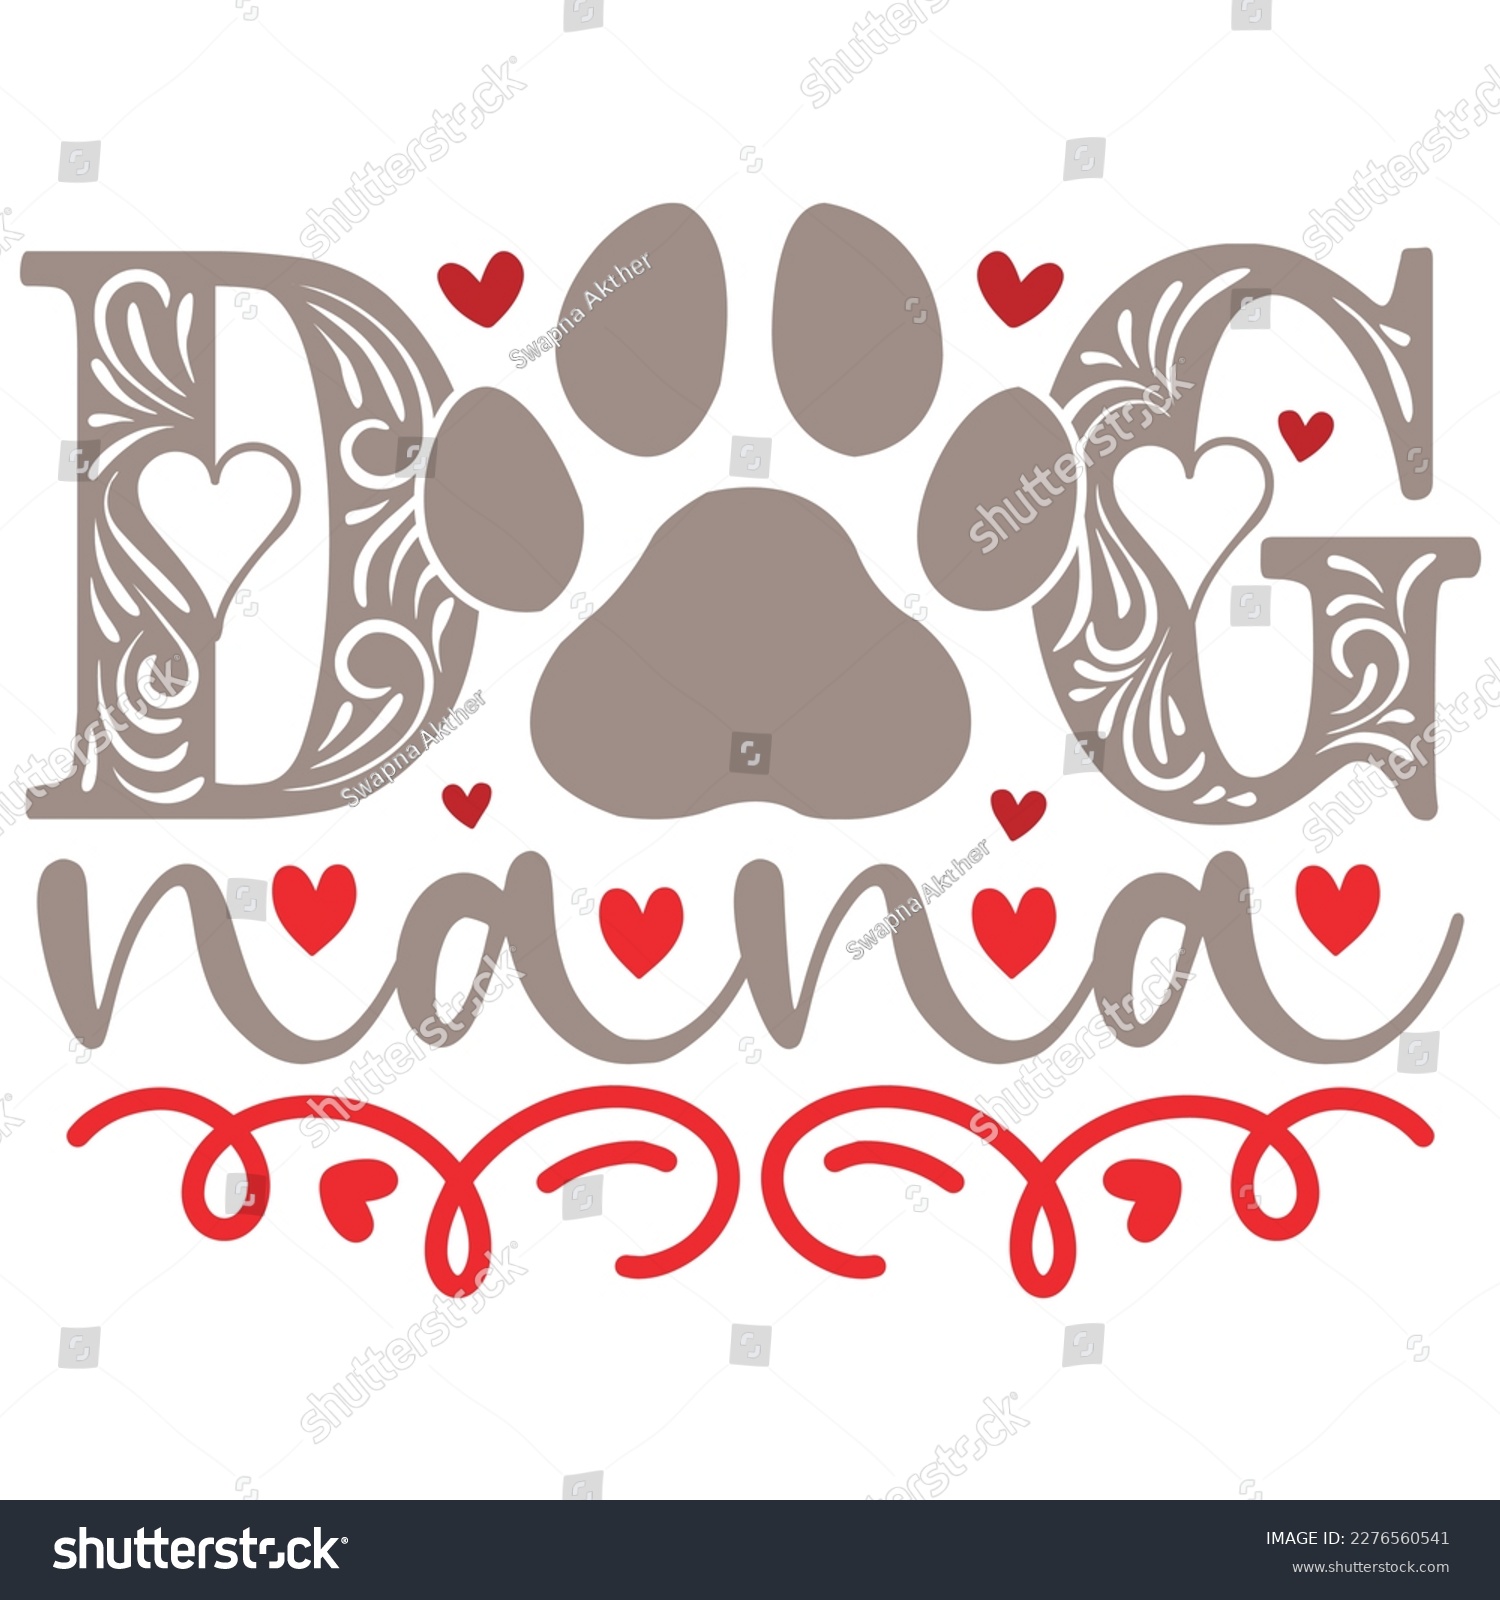 SVG of Dog Nana - Boho Retro Style Dog T-shirt And SVG Design. Dog SVG Quotes T shirt Design, Vector EPS Editable Files, Can You Download This File. svg